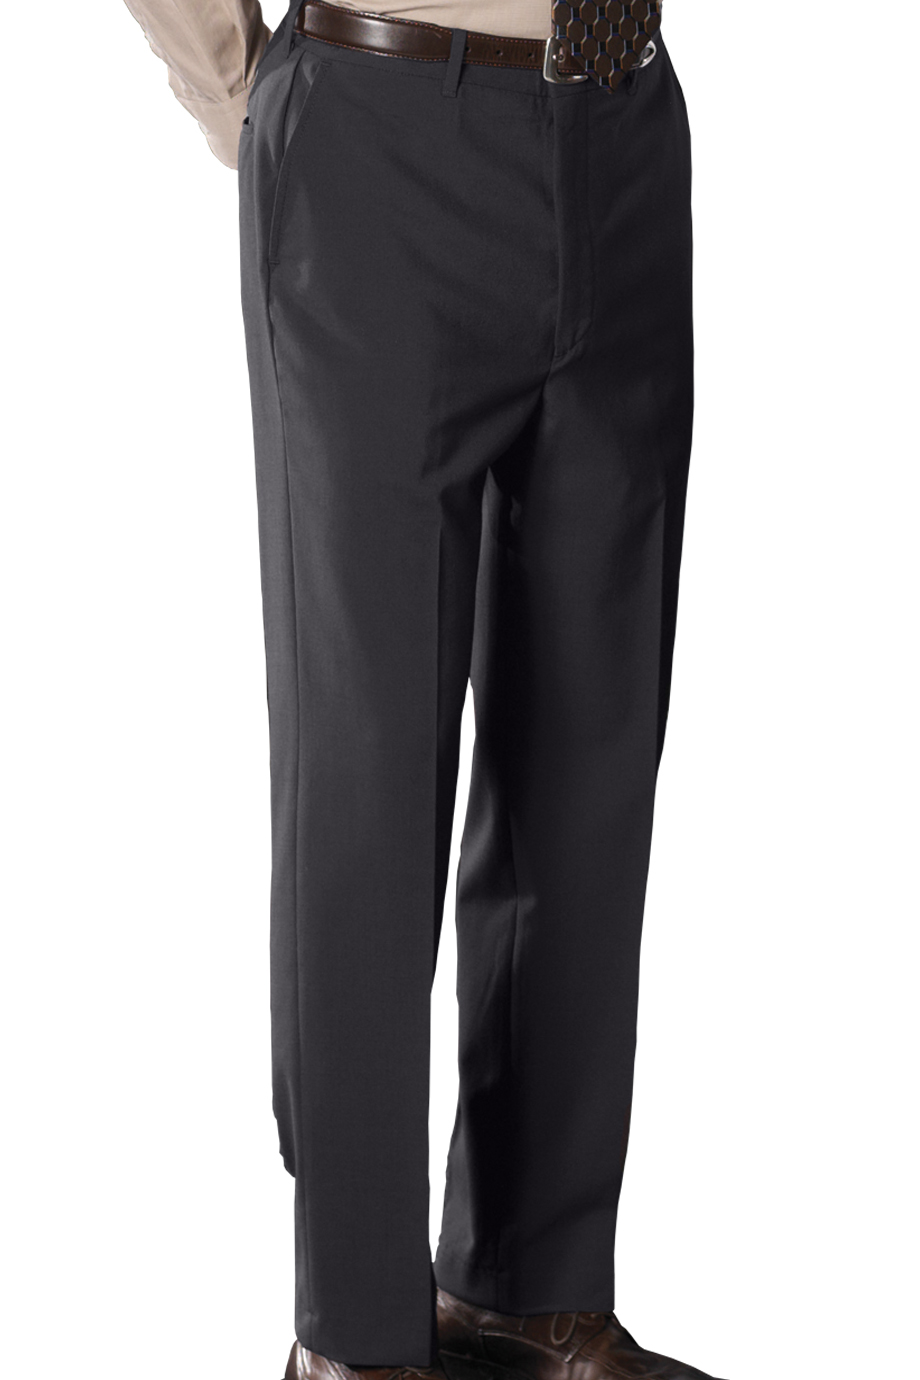 Edwards Big & Tall  Wool Blend Flat Front Dress Pant - Online exclusive